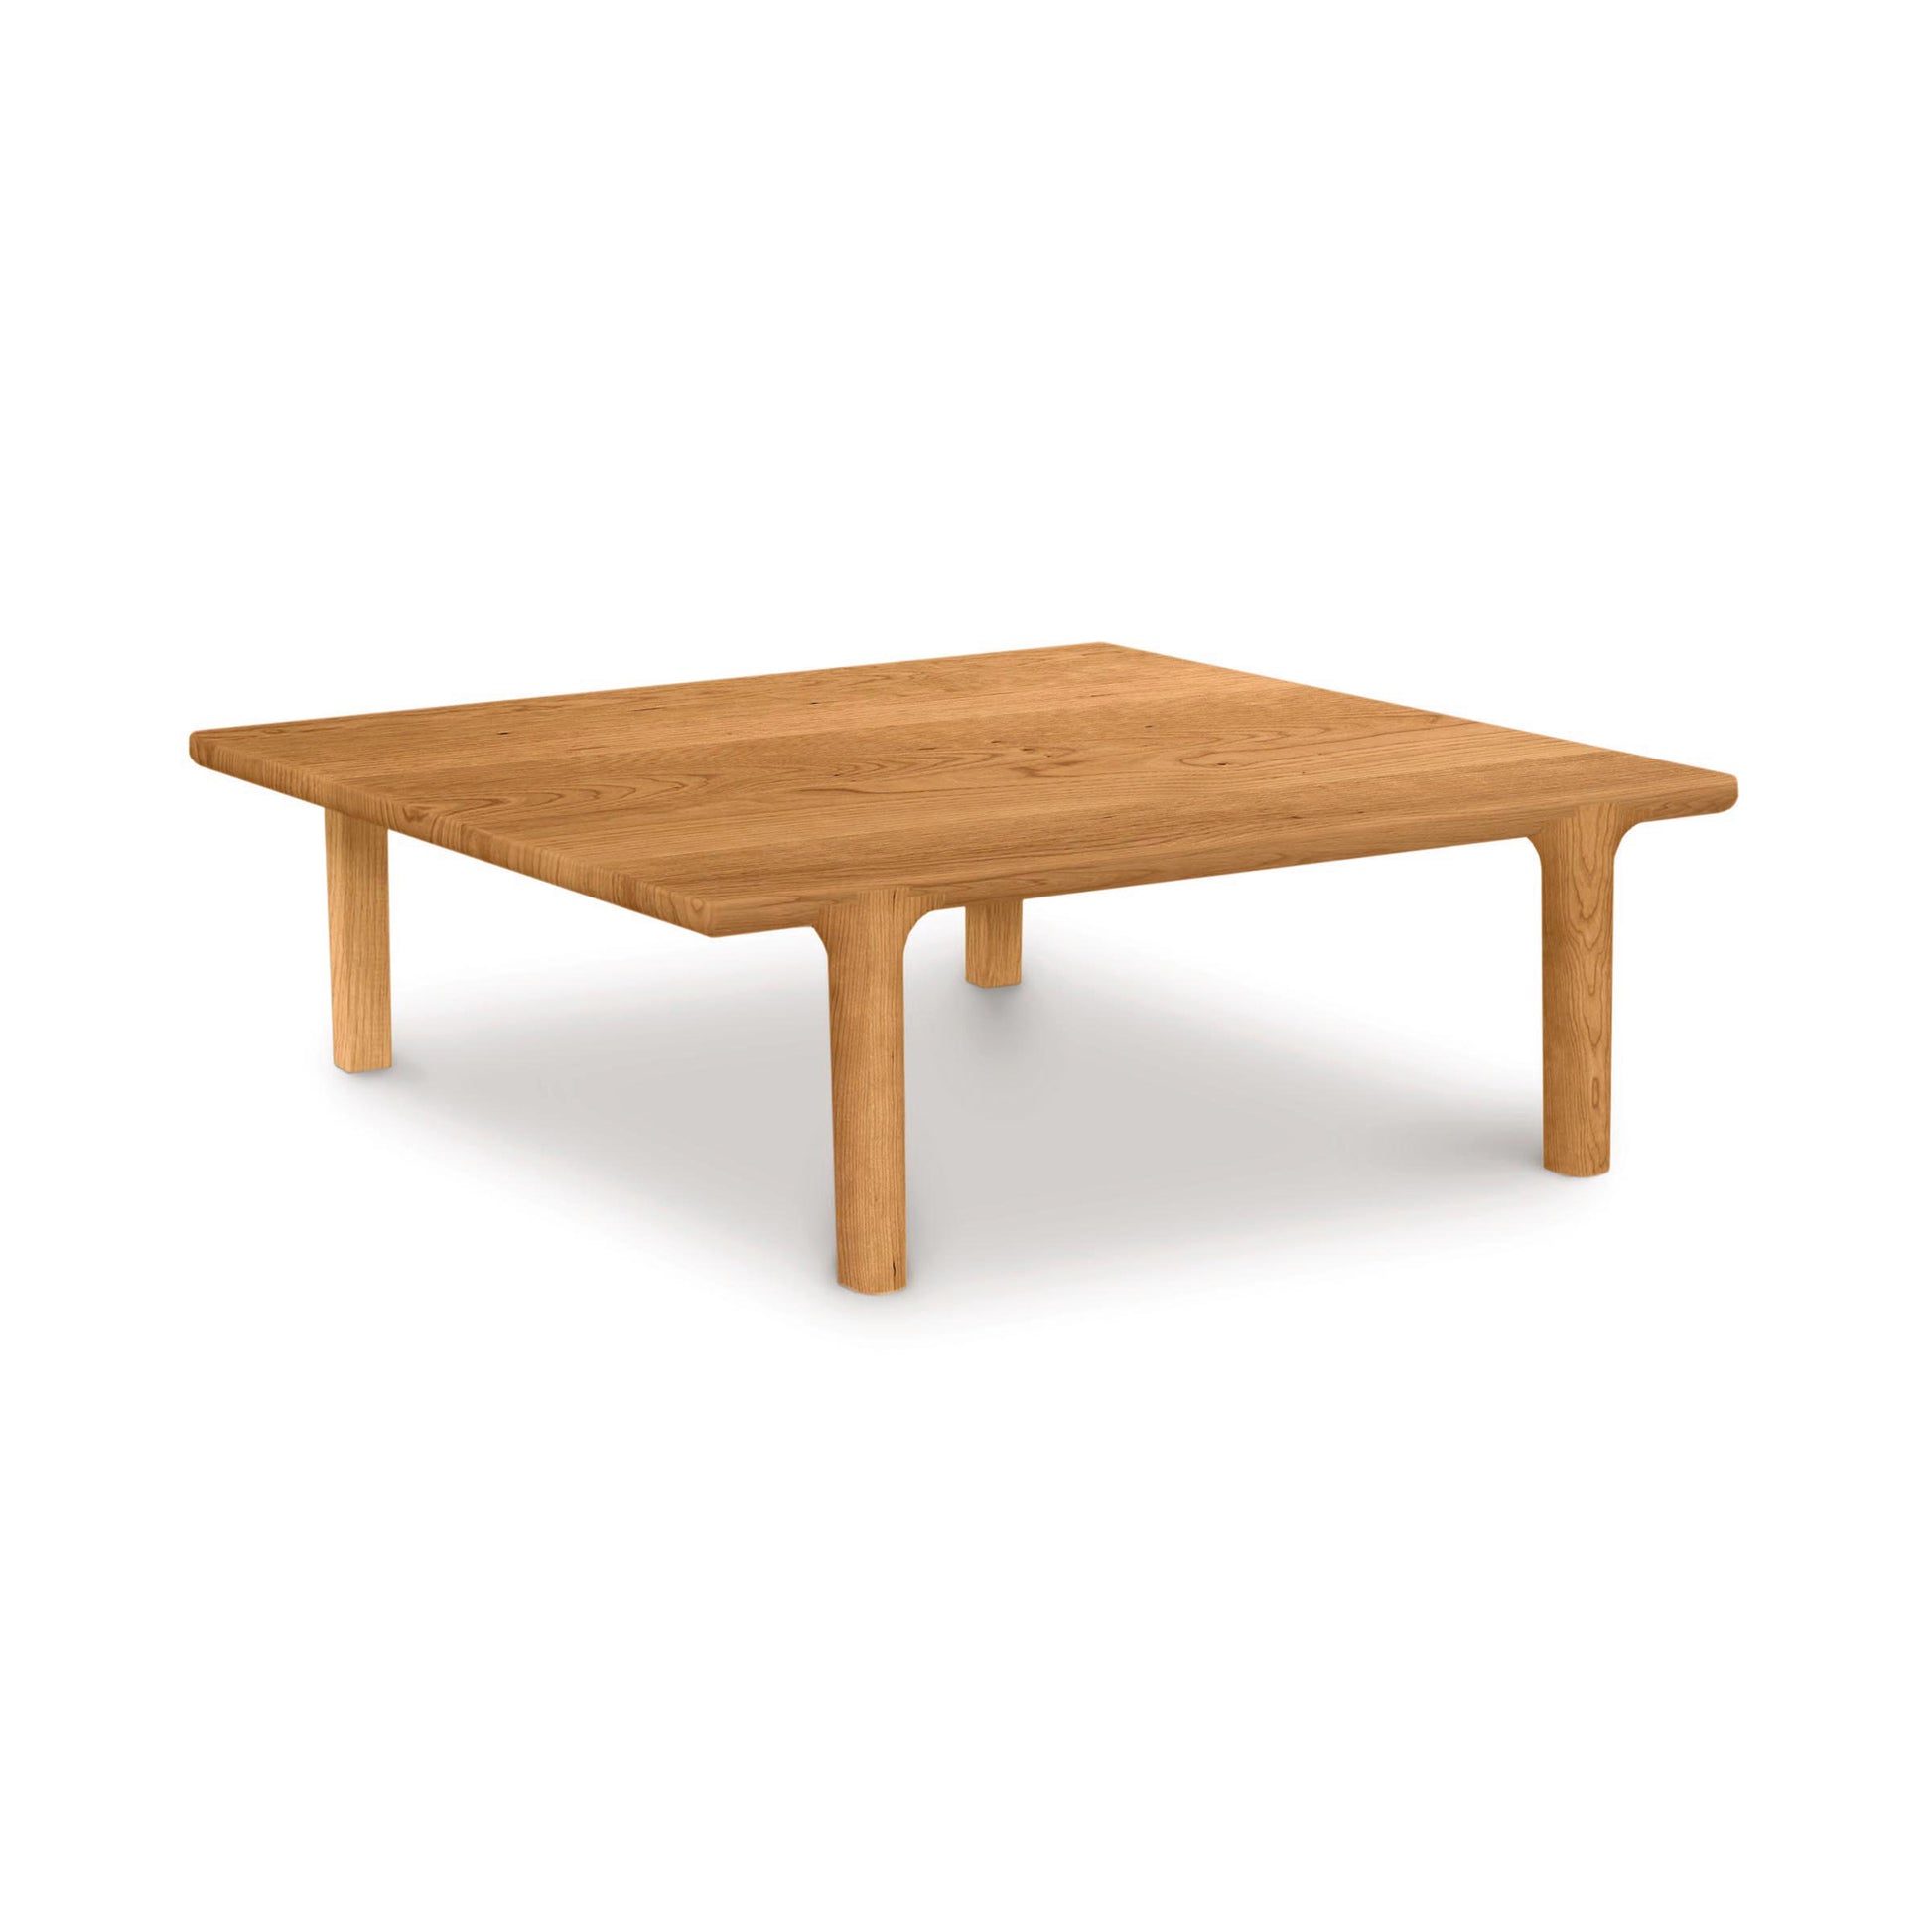 The Copeland Furniture Sierra Square Coffee Table, with its contemporary design, sits elegantly on a white background.